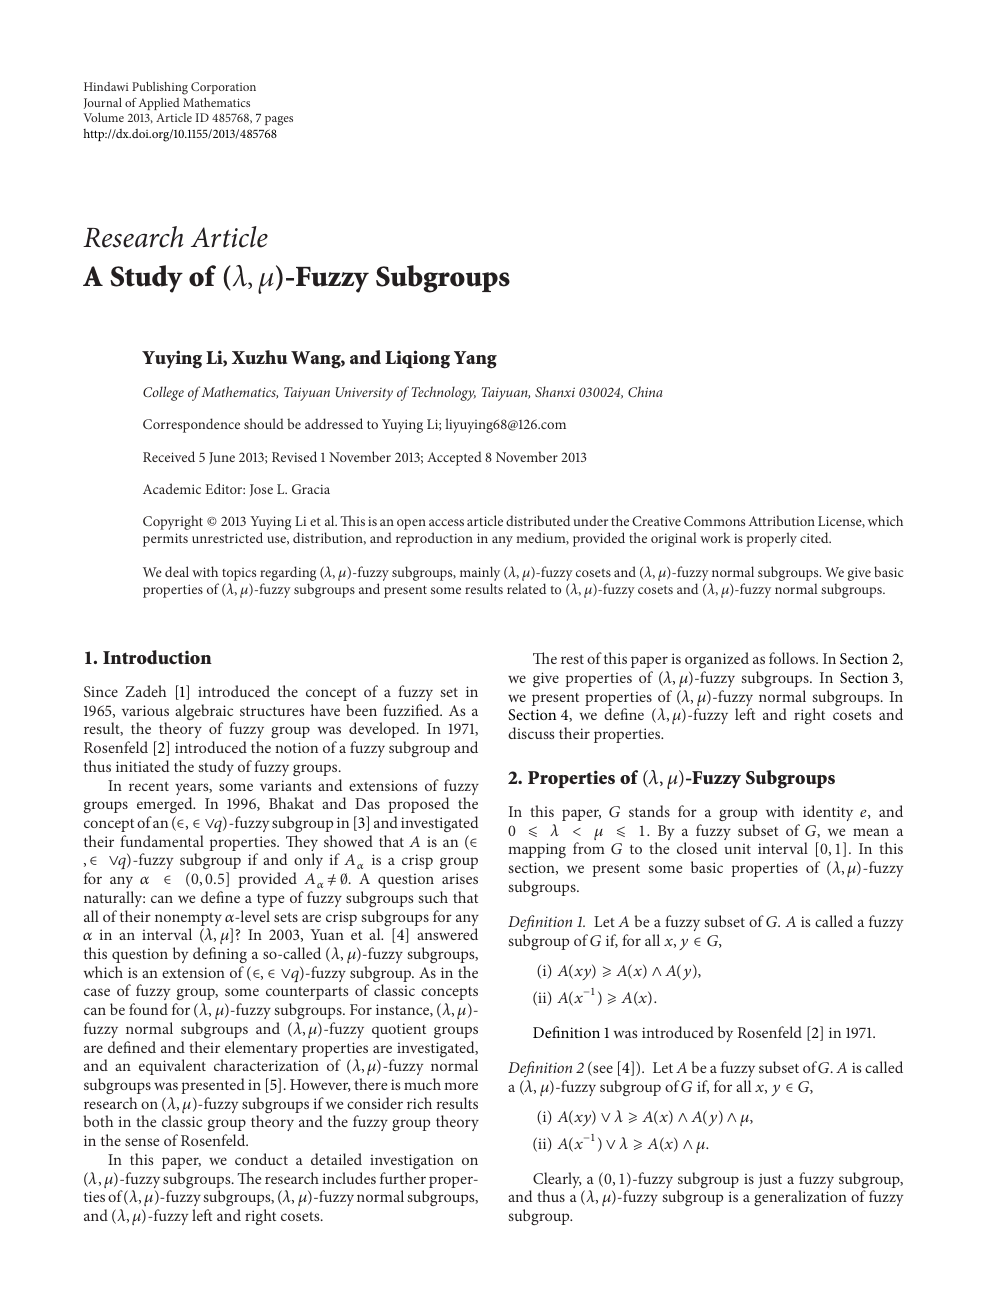 A Study Of Fuzzy Subgroups Topic Of Research Paper In Mathematics Download Scholarly Article Pdf And Read For Free On Cyberleninka Open Science Hub